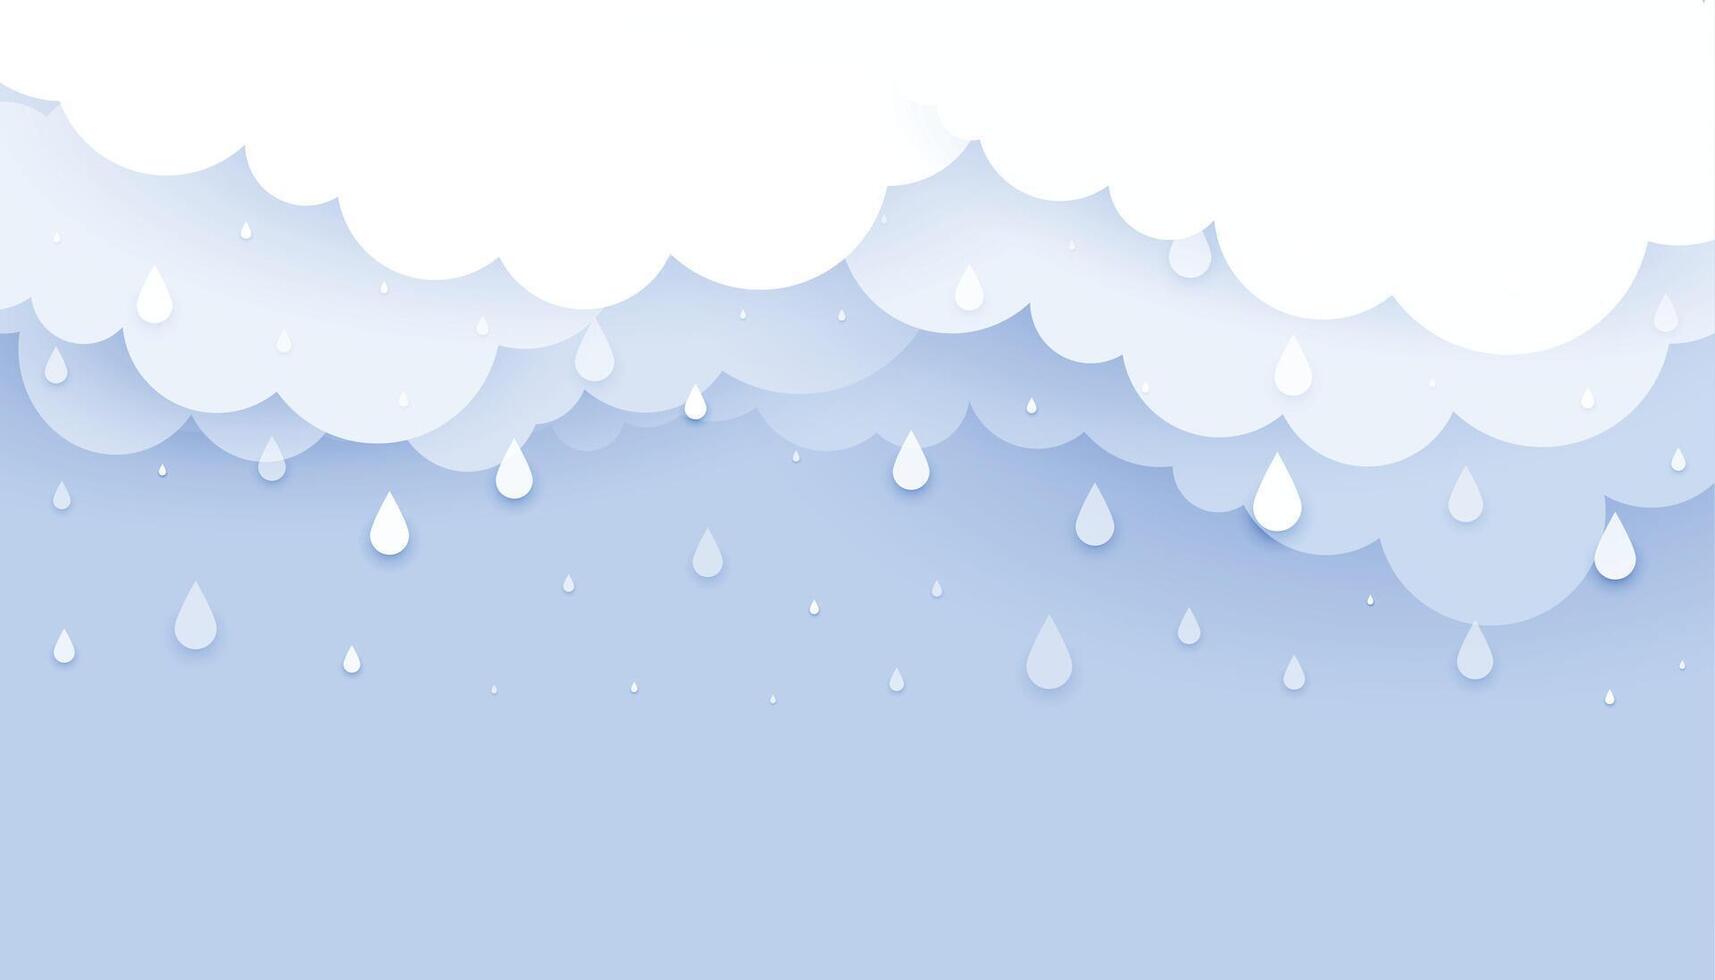 cloud with falling rain drops papercur style background vector